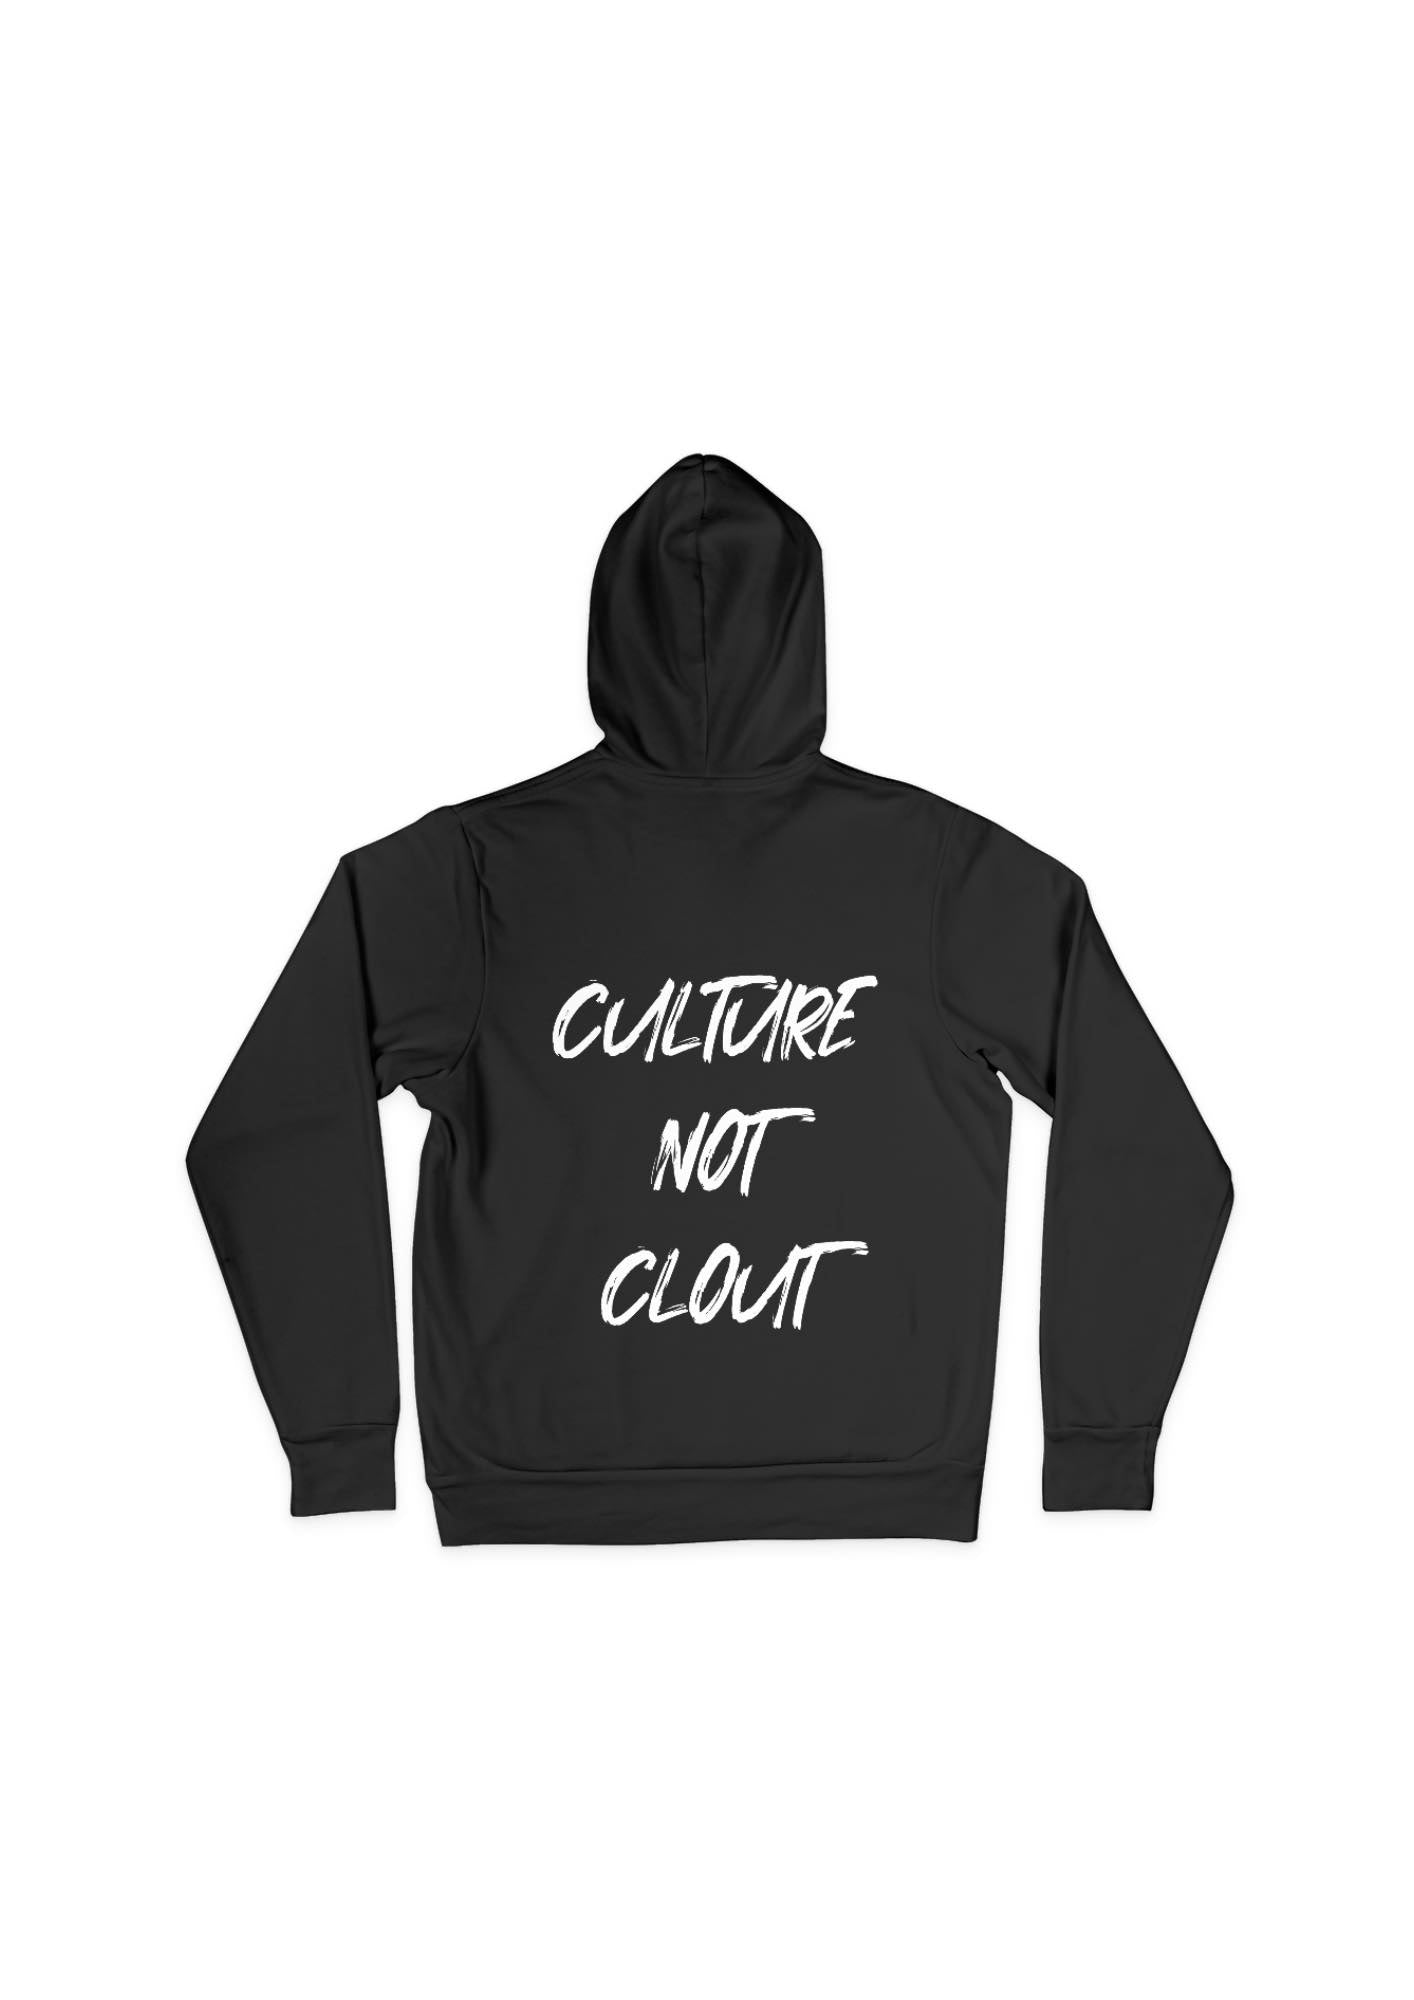 "Culture Not Clout" Hoodies **Available Now**